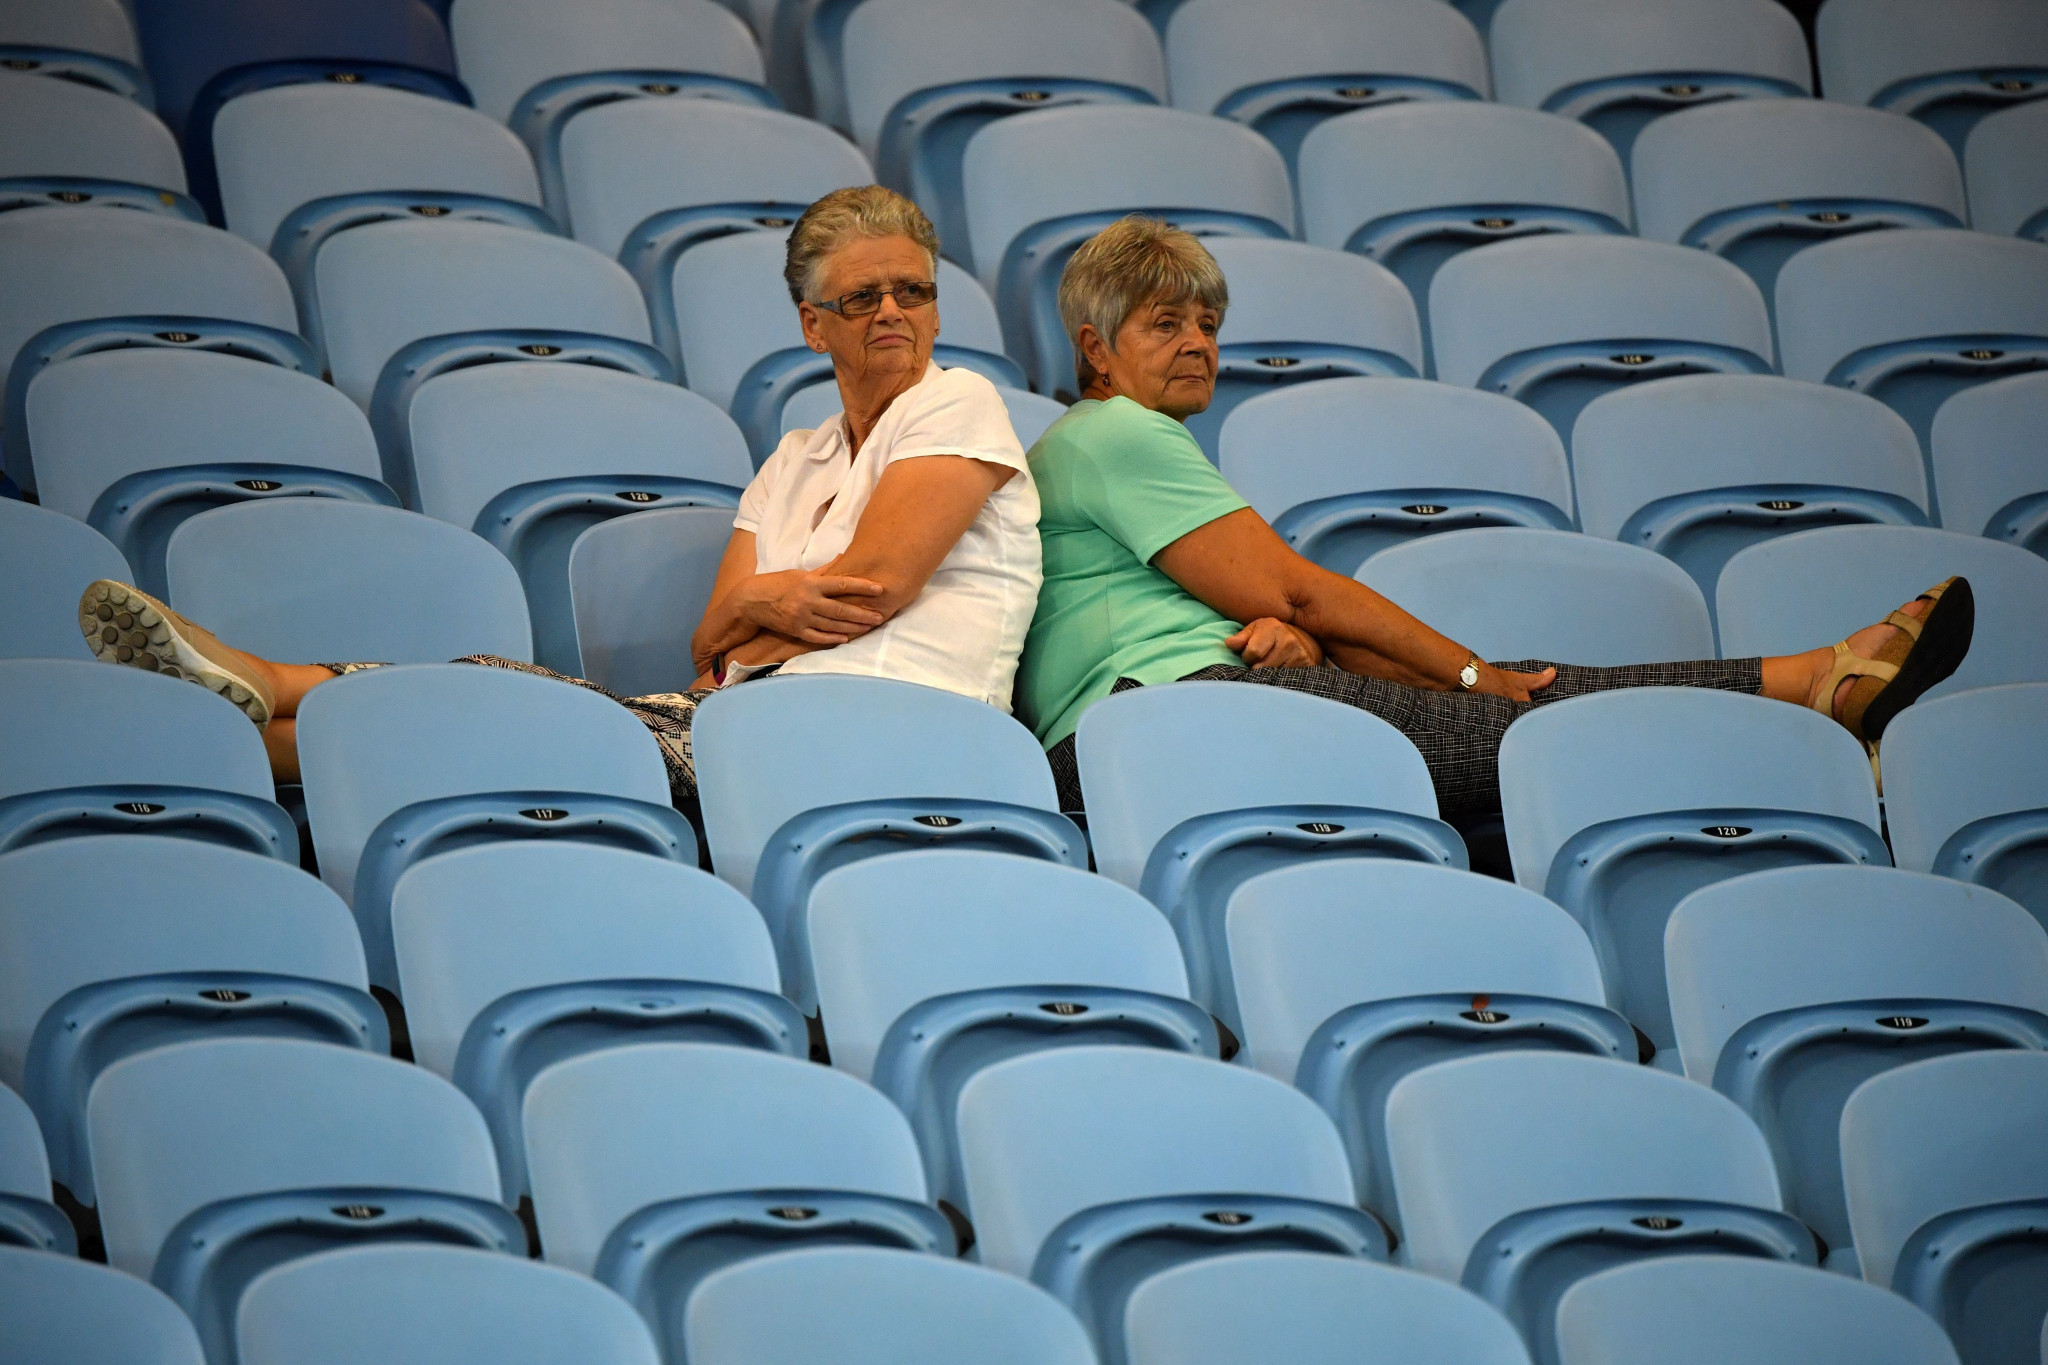 Spectators at the Australian Open have been forced to stay late for matches ©Getty Images